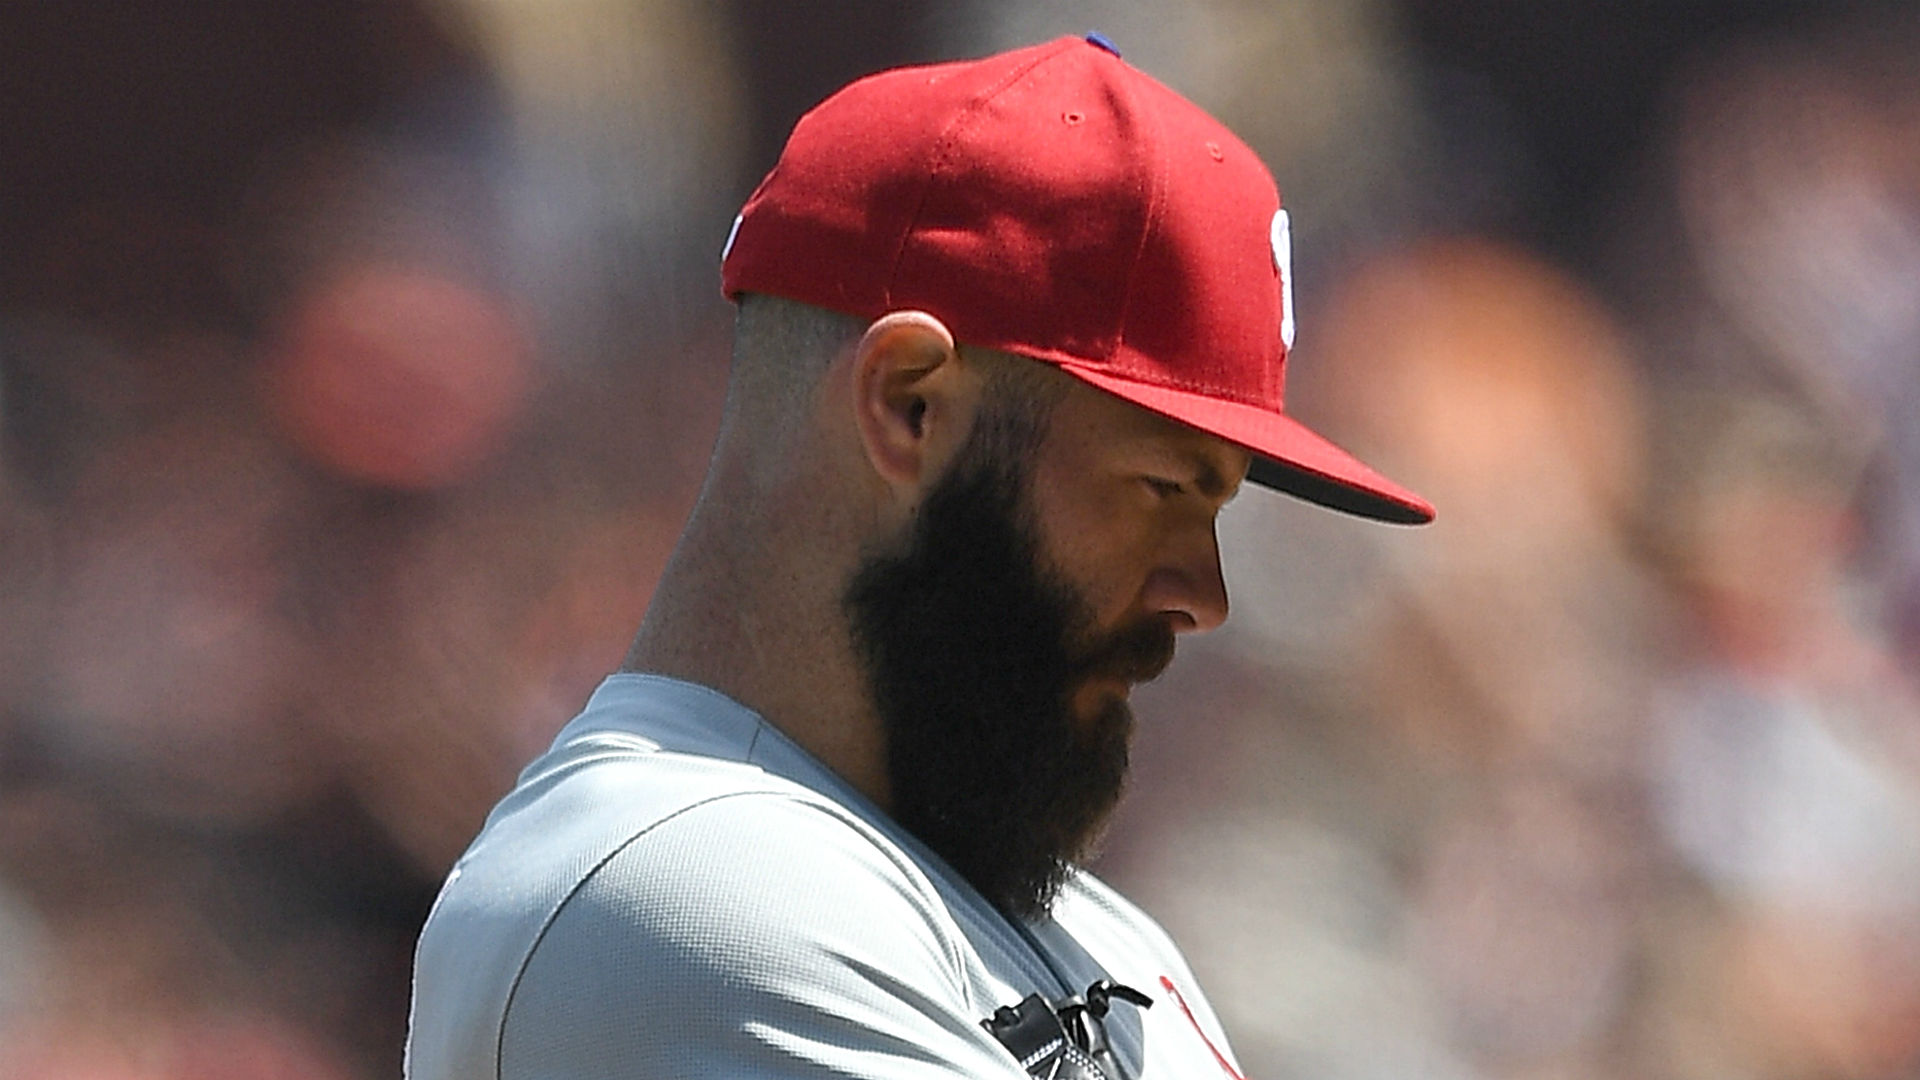 Arrieta is likely headed for surgery and he told reporters Wednesday if he undergoes a procedure he probably won't pitch again this season.